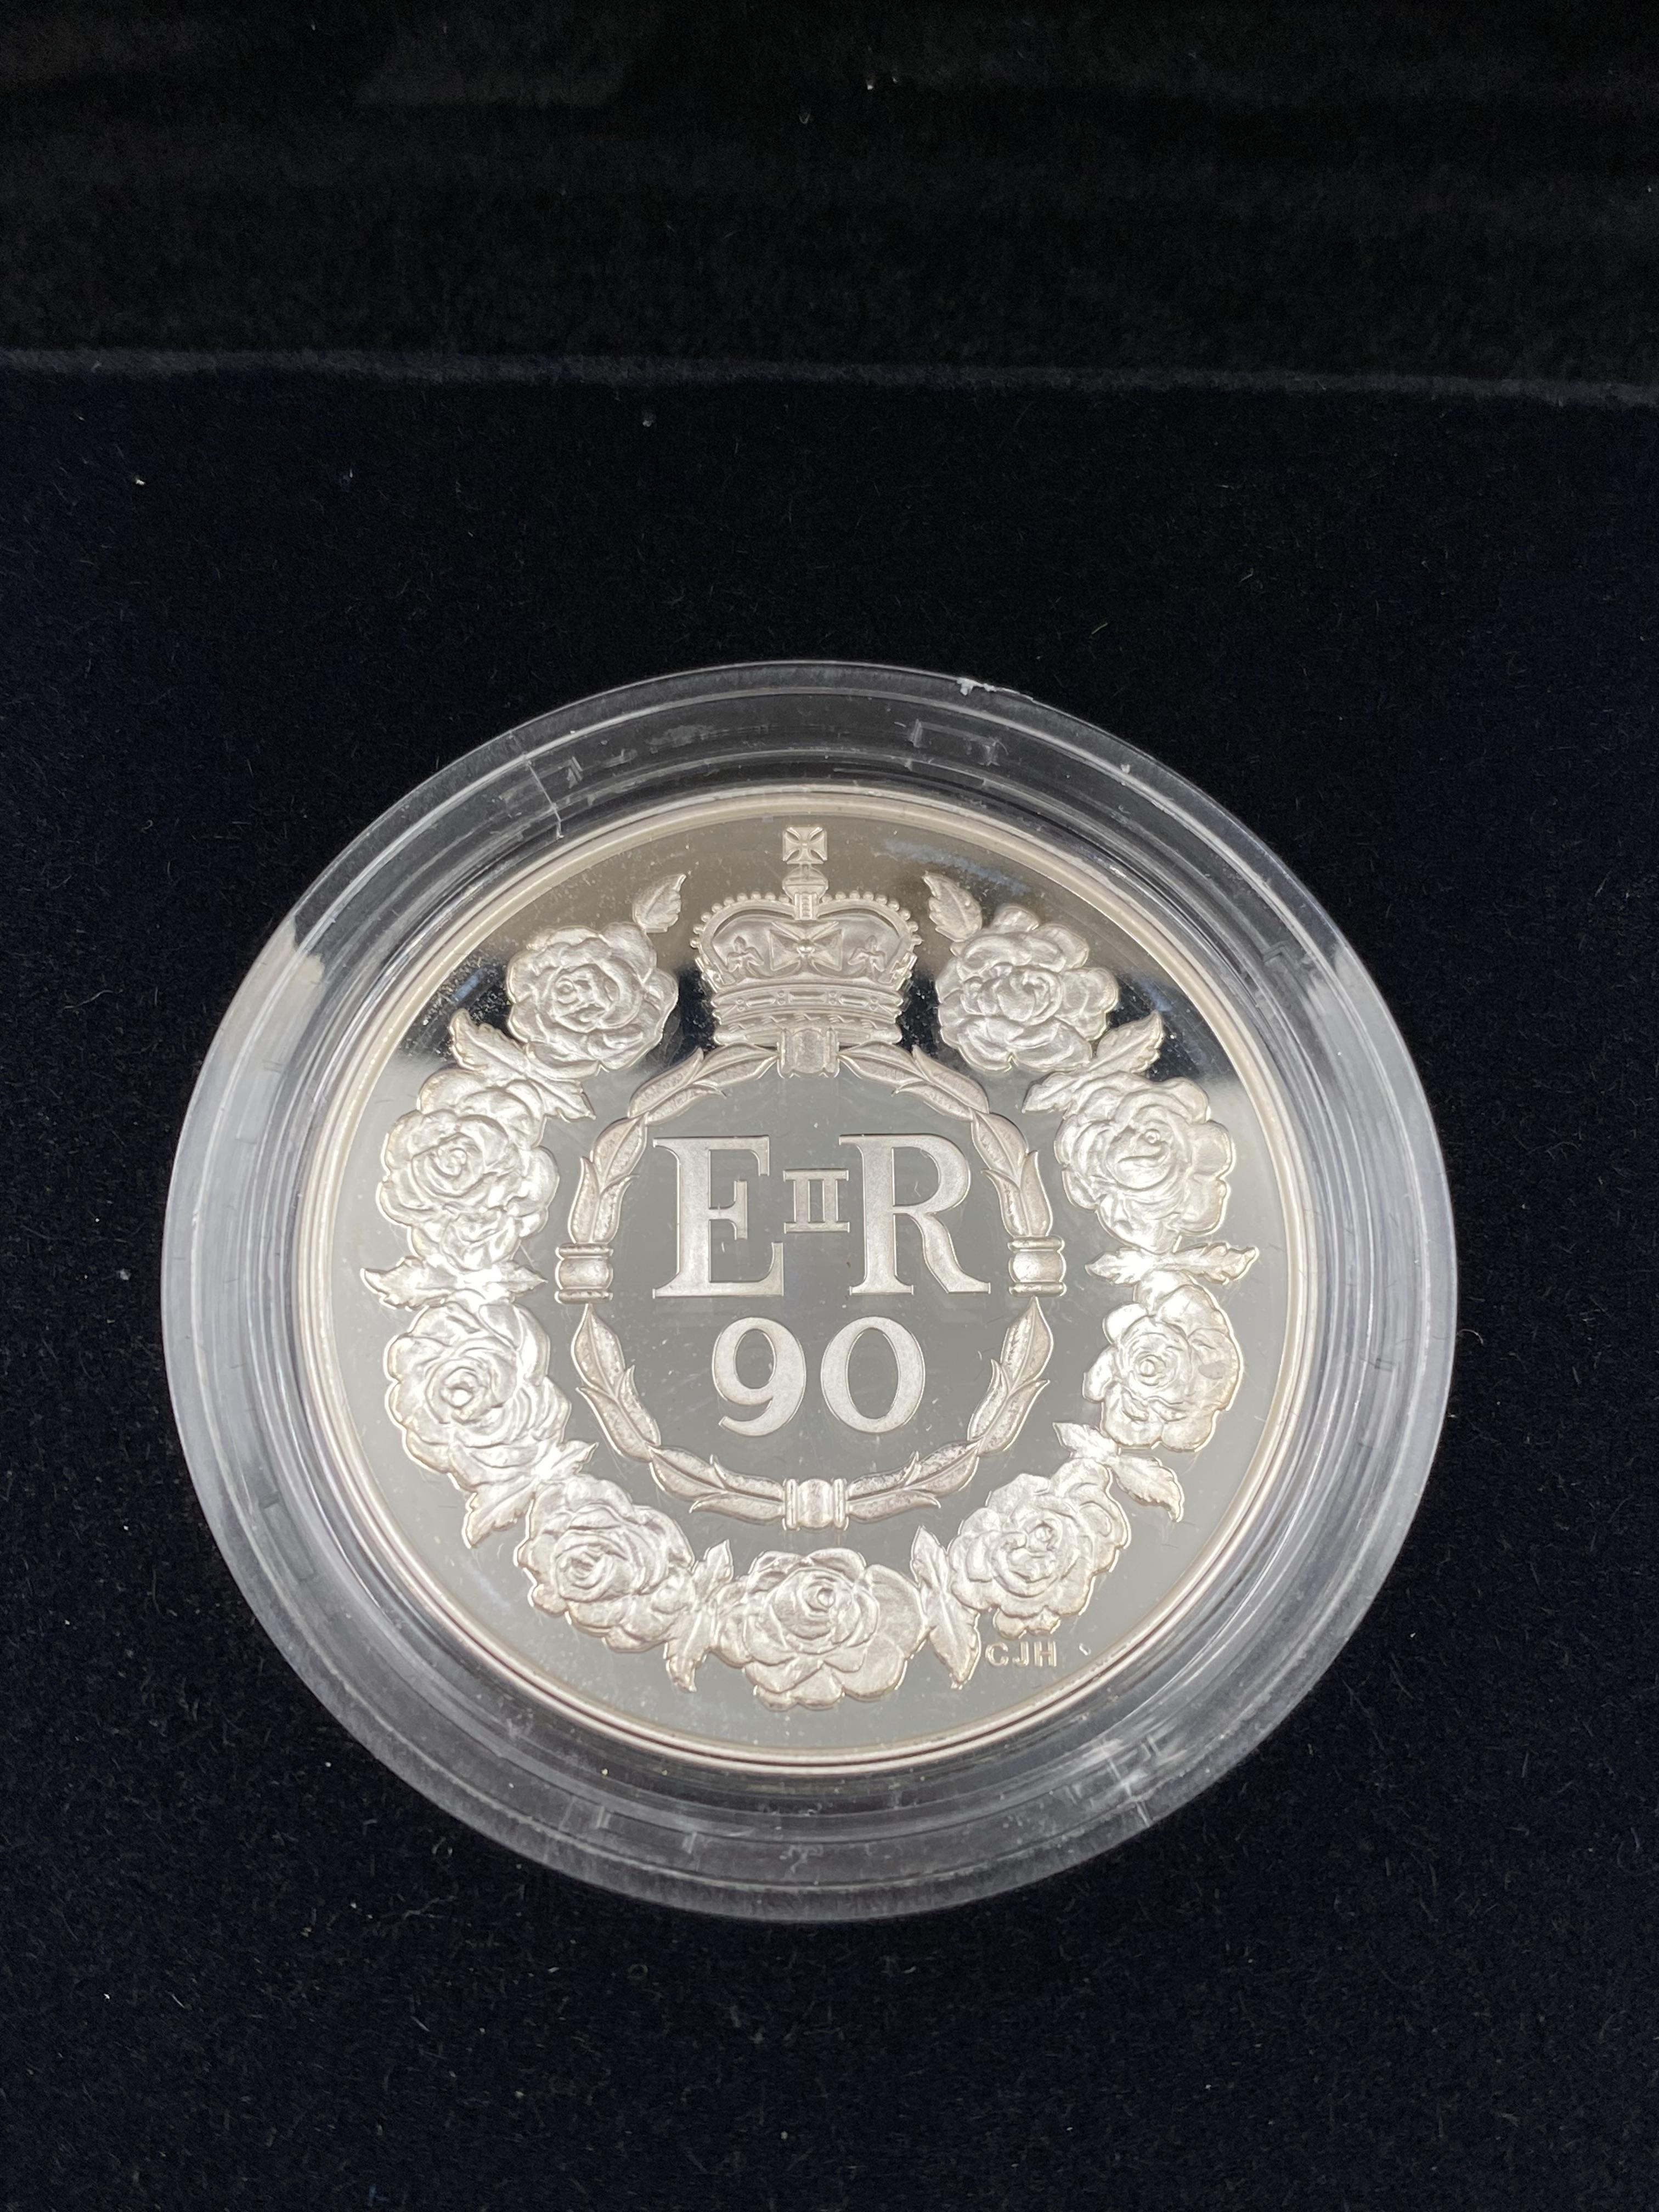 Royal Mint 90th Birthday of Her Majesty The Queen £5 silver proof coin - Image 3 of 4